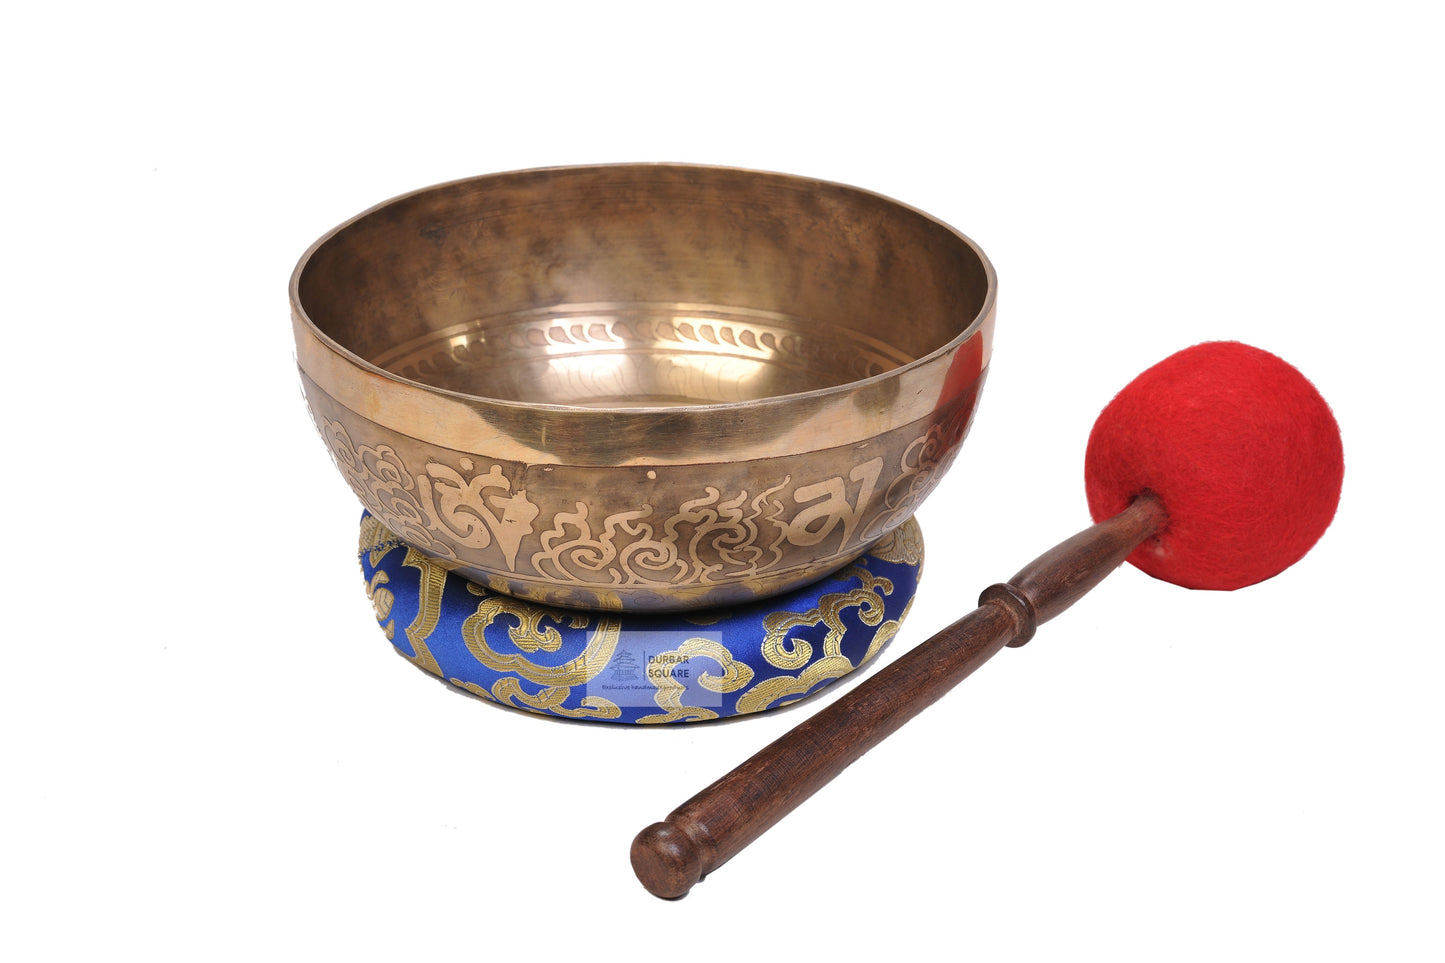 Singing Bowl carved with Buddhist prayers